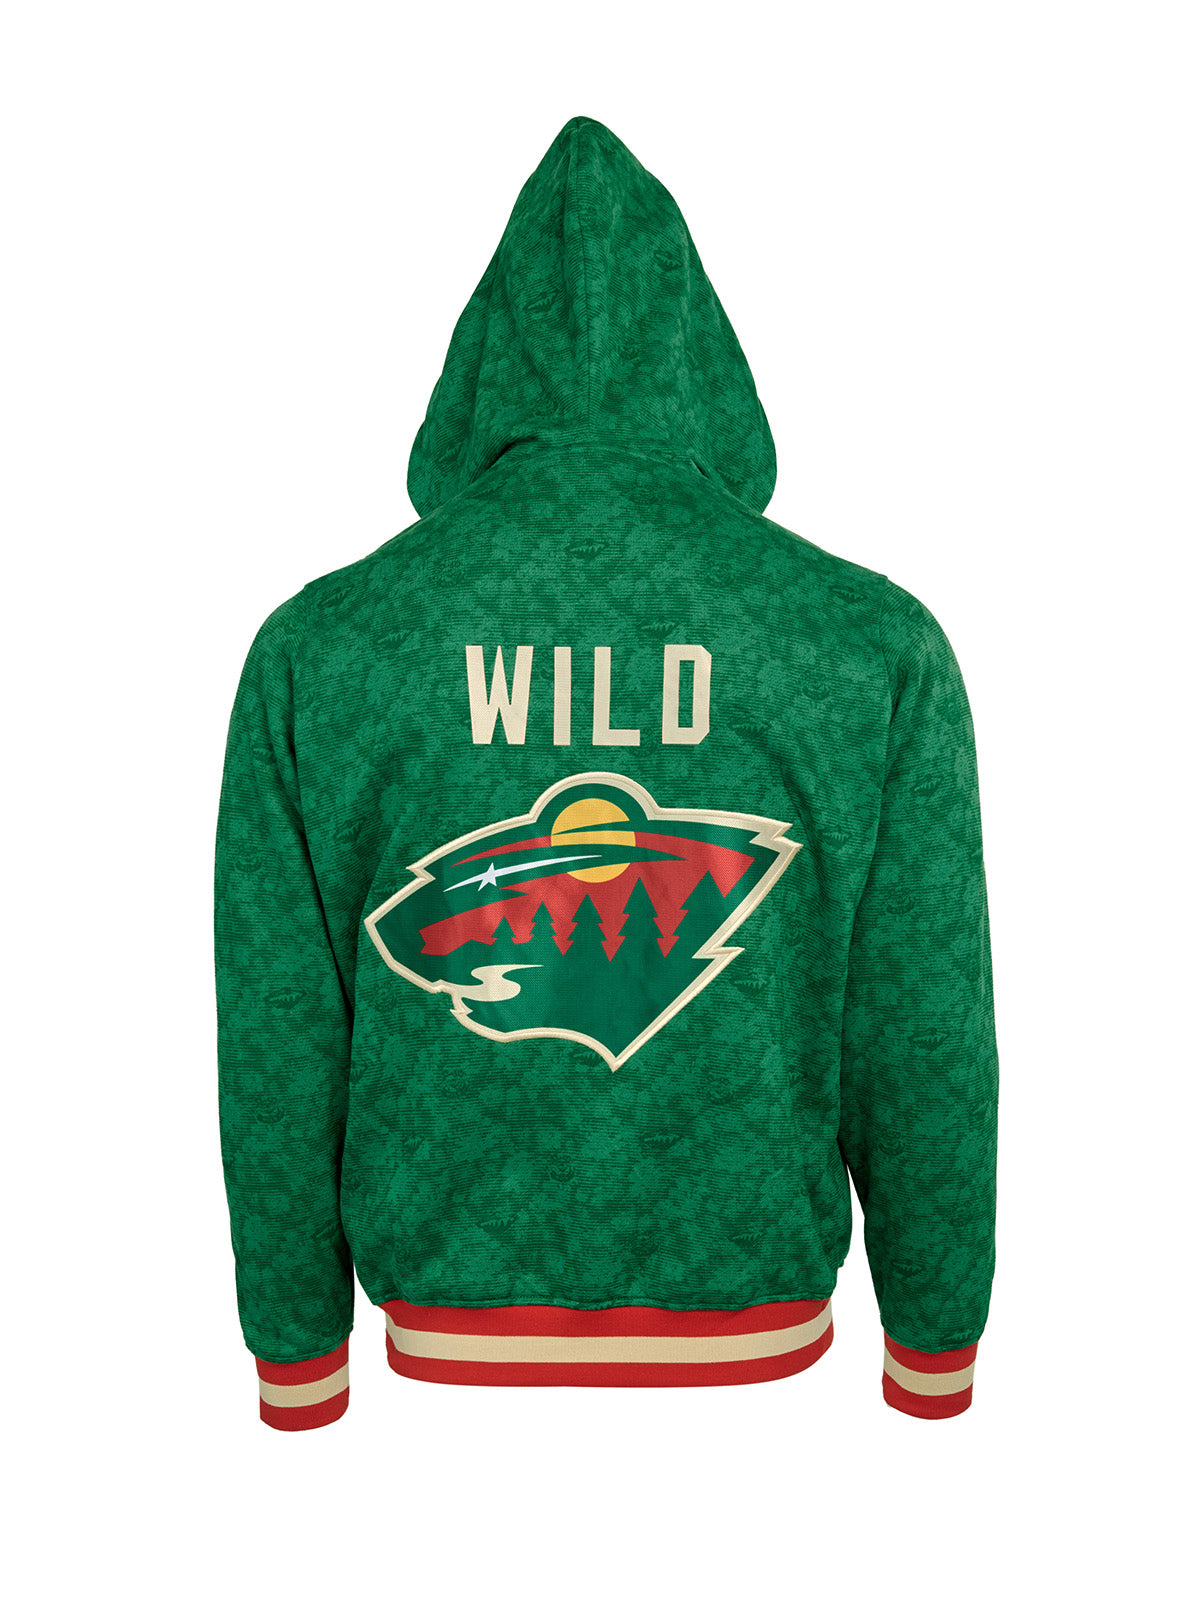 Minnesota Wild Hoodie - Show your team spirit, with the iconic team logo patch centered on the back, and proudly display your Minnesota Wild support in their team colors with this NHL hockey hoodie.